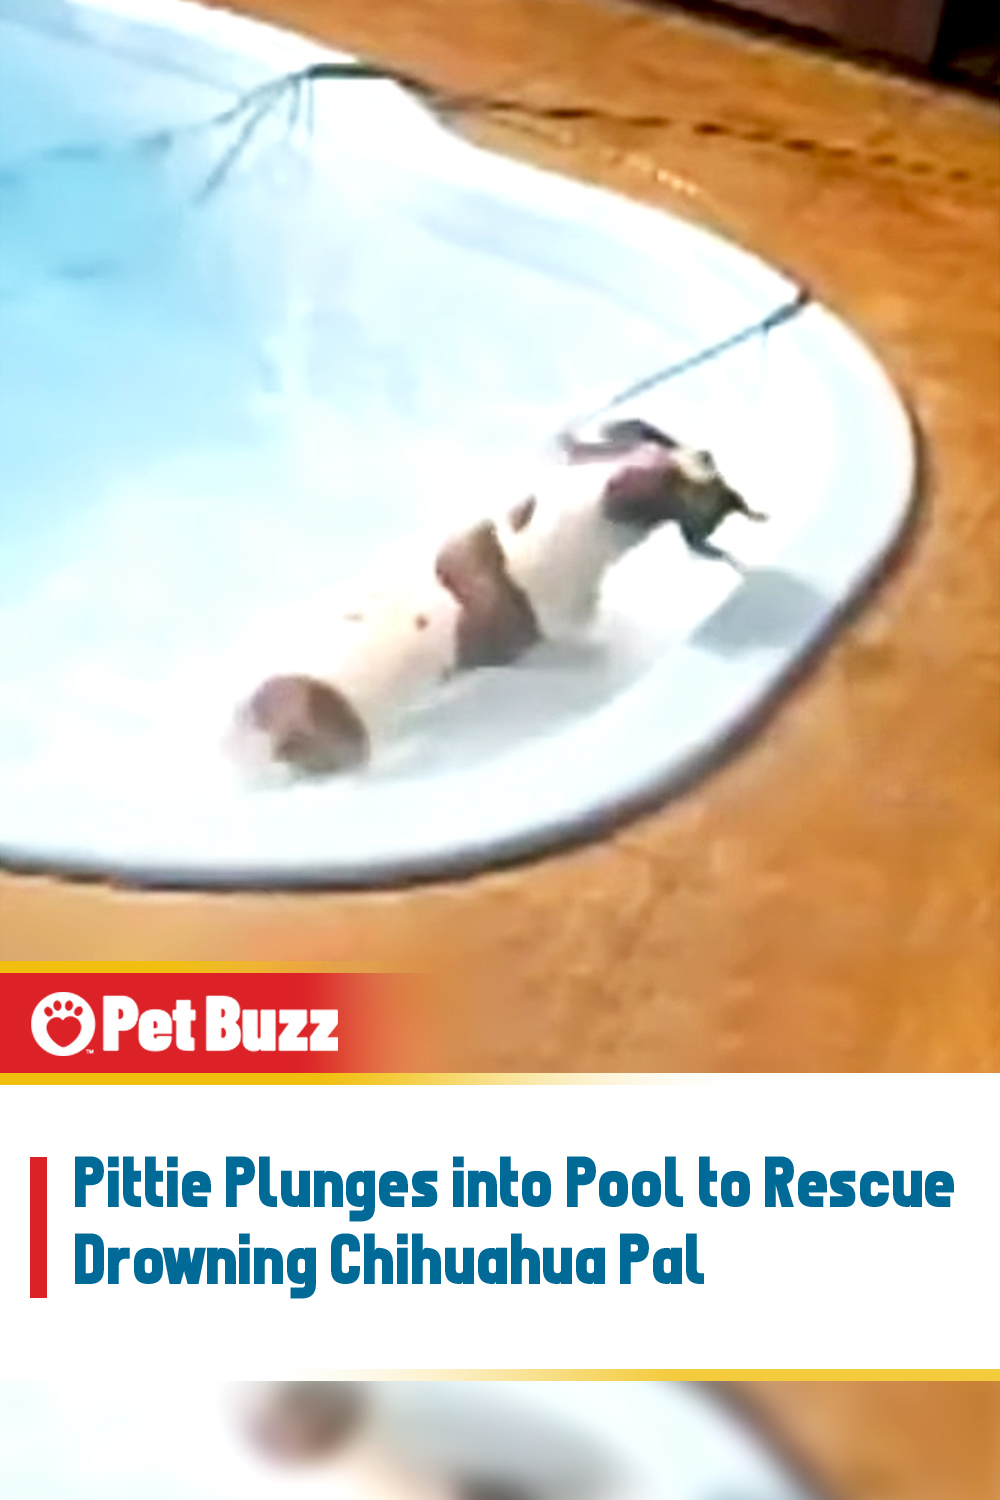 Pittie Plunges into Pool to Rescue Drowning Chihuahua Pal